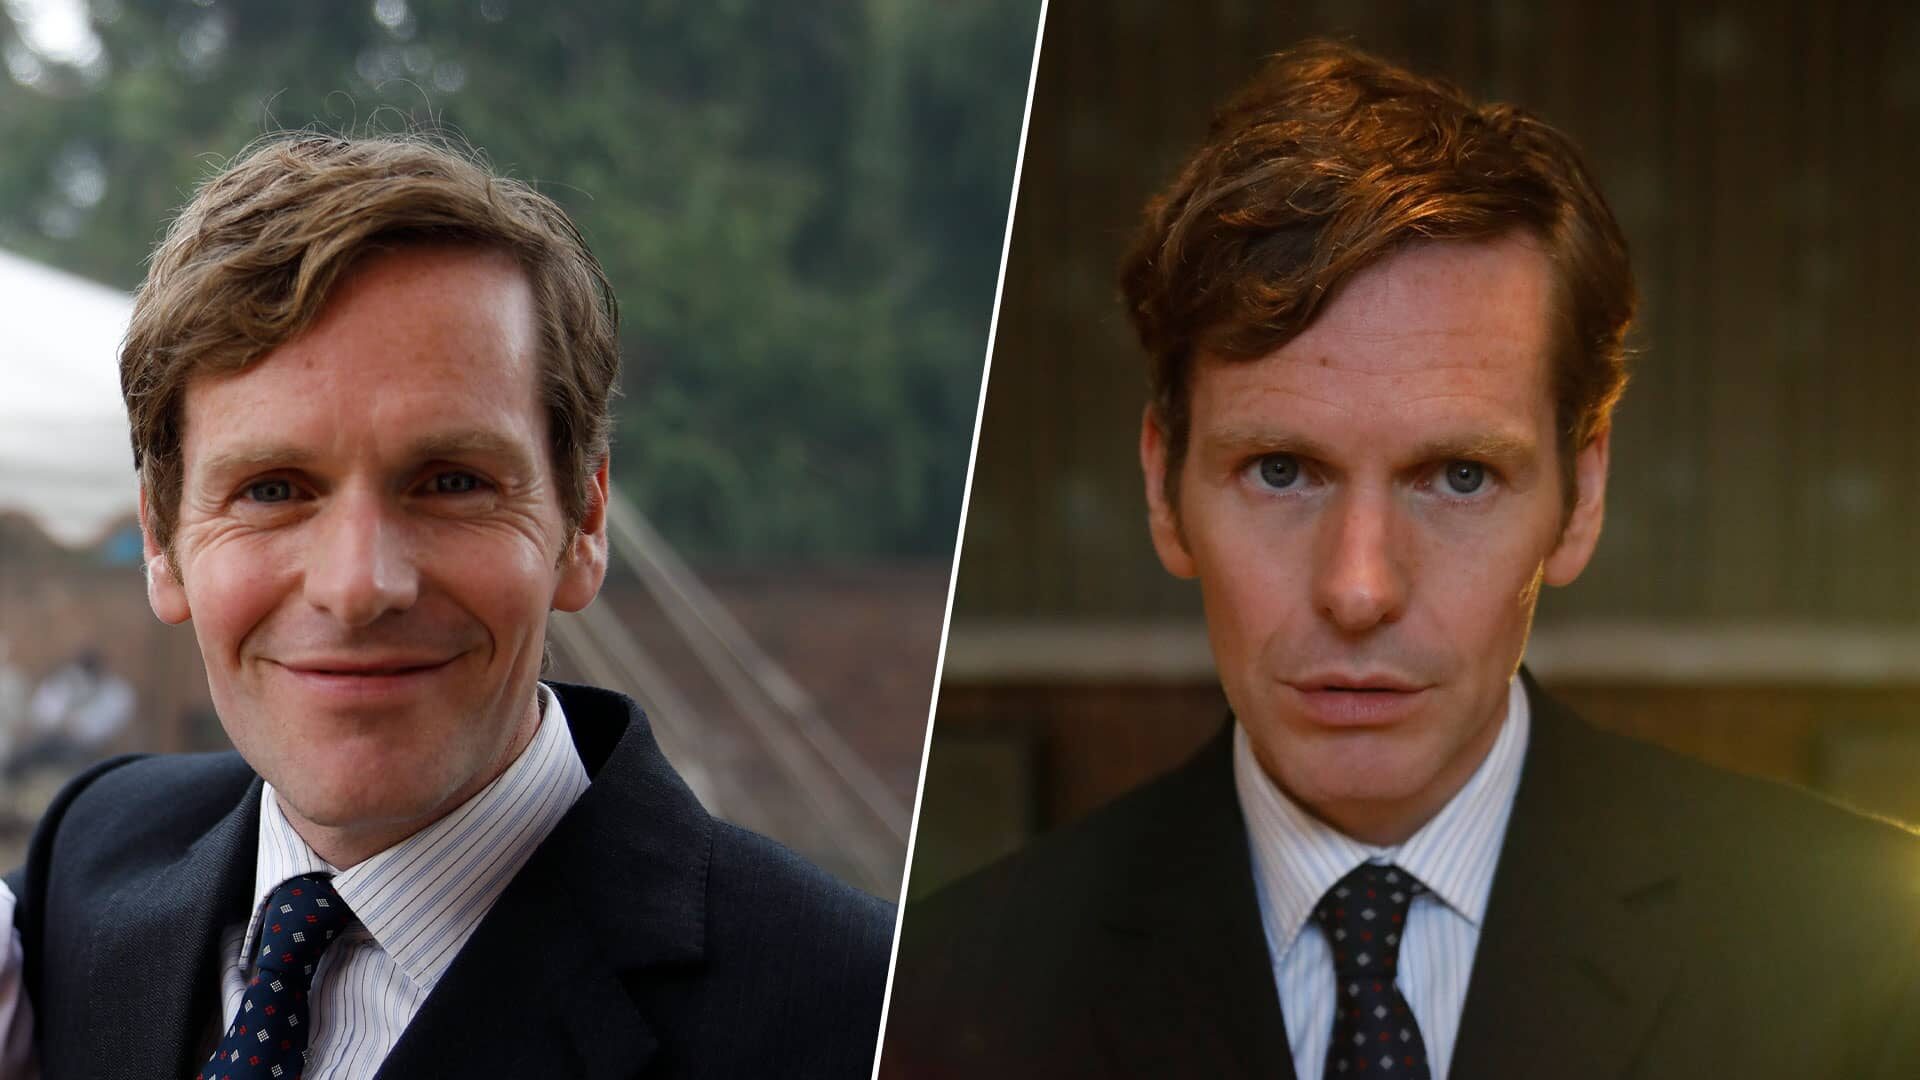 A split image of actor Shaun Evans smiling broadly on the left, and his character Endeavour Morse looking serious and distraught on the left